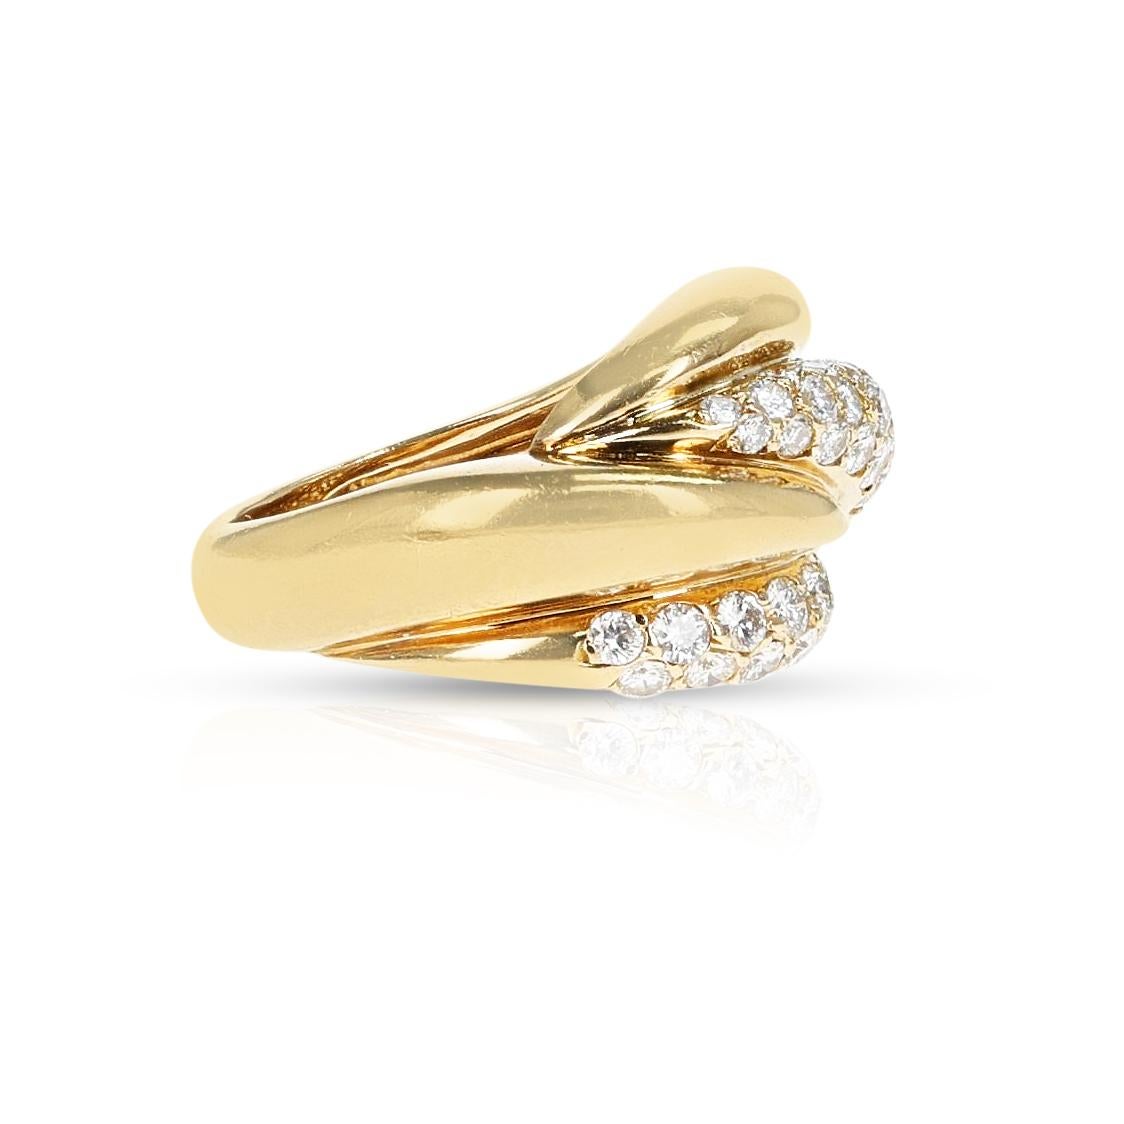 A French Van Cleef & Arpels Diamond Four-Step Ring made in 18 Karat Gold. The diamonds weigh appx. 1.25 carats. The ring size is 5.50 US. The total weight of the ring is 8.50 grams. 